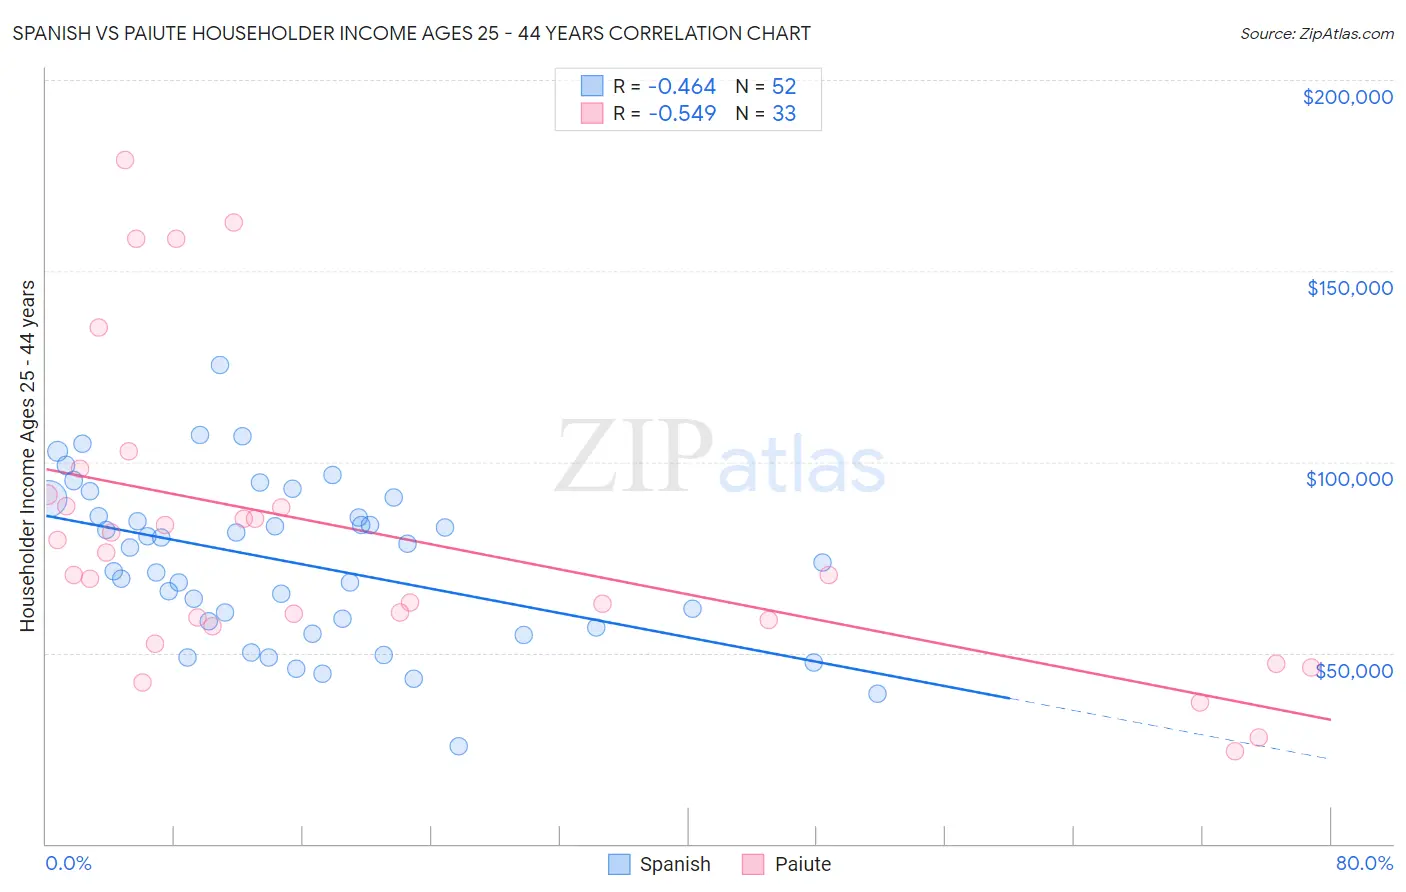 Spanish vs Paiute Householder Income Ages 25 - 44 years